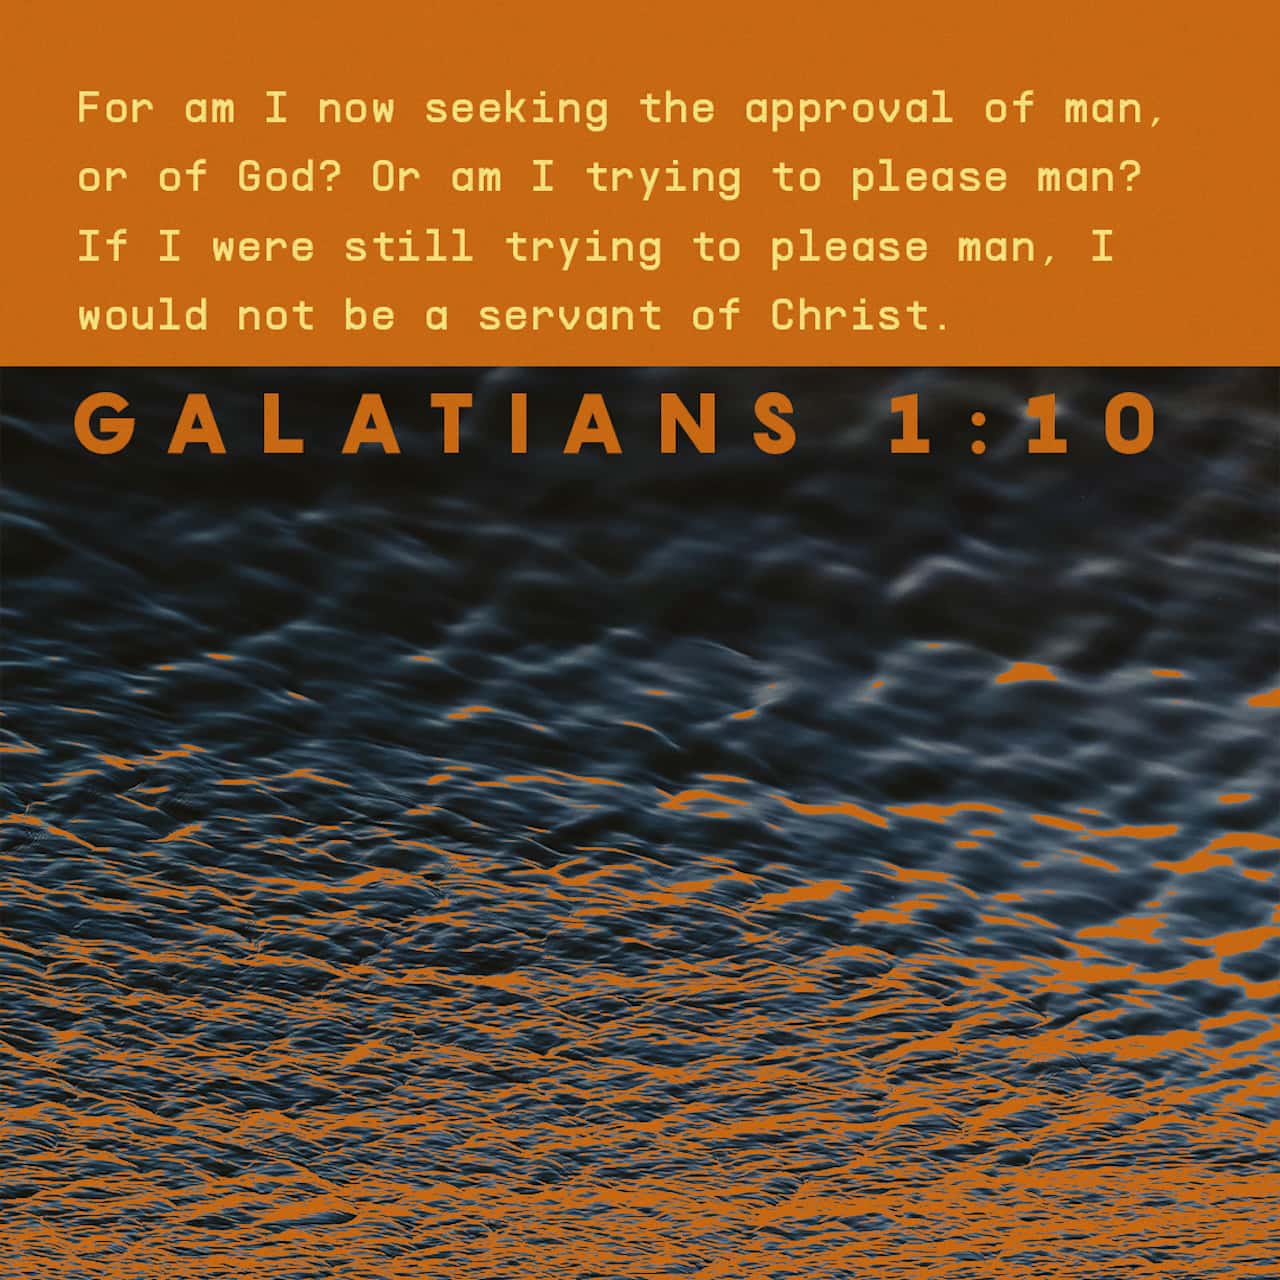 Galatians 1 6 12 I Am Astonished That You Are So Quickly Deserting The One Who Called You To Live In The Grace Of Christ And Are Turning To A Different Gospel Which Is